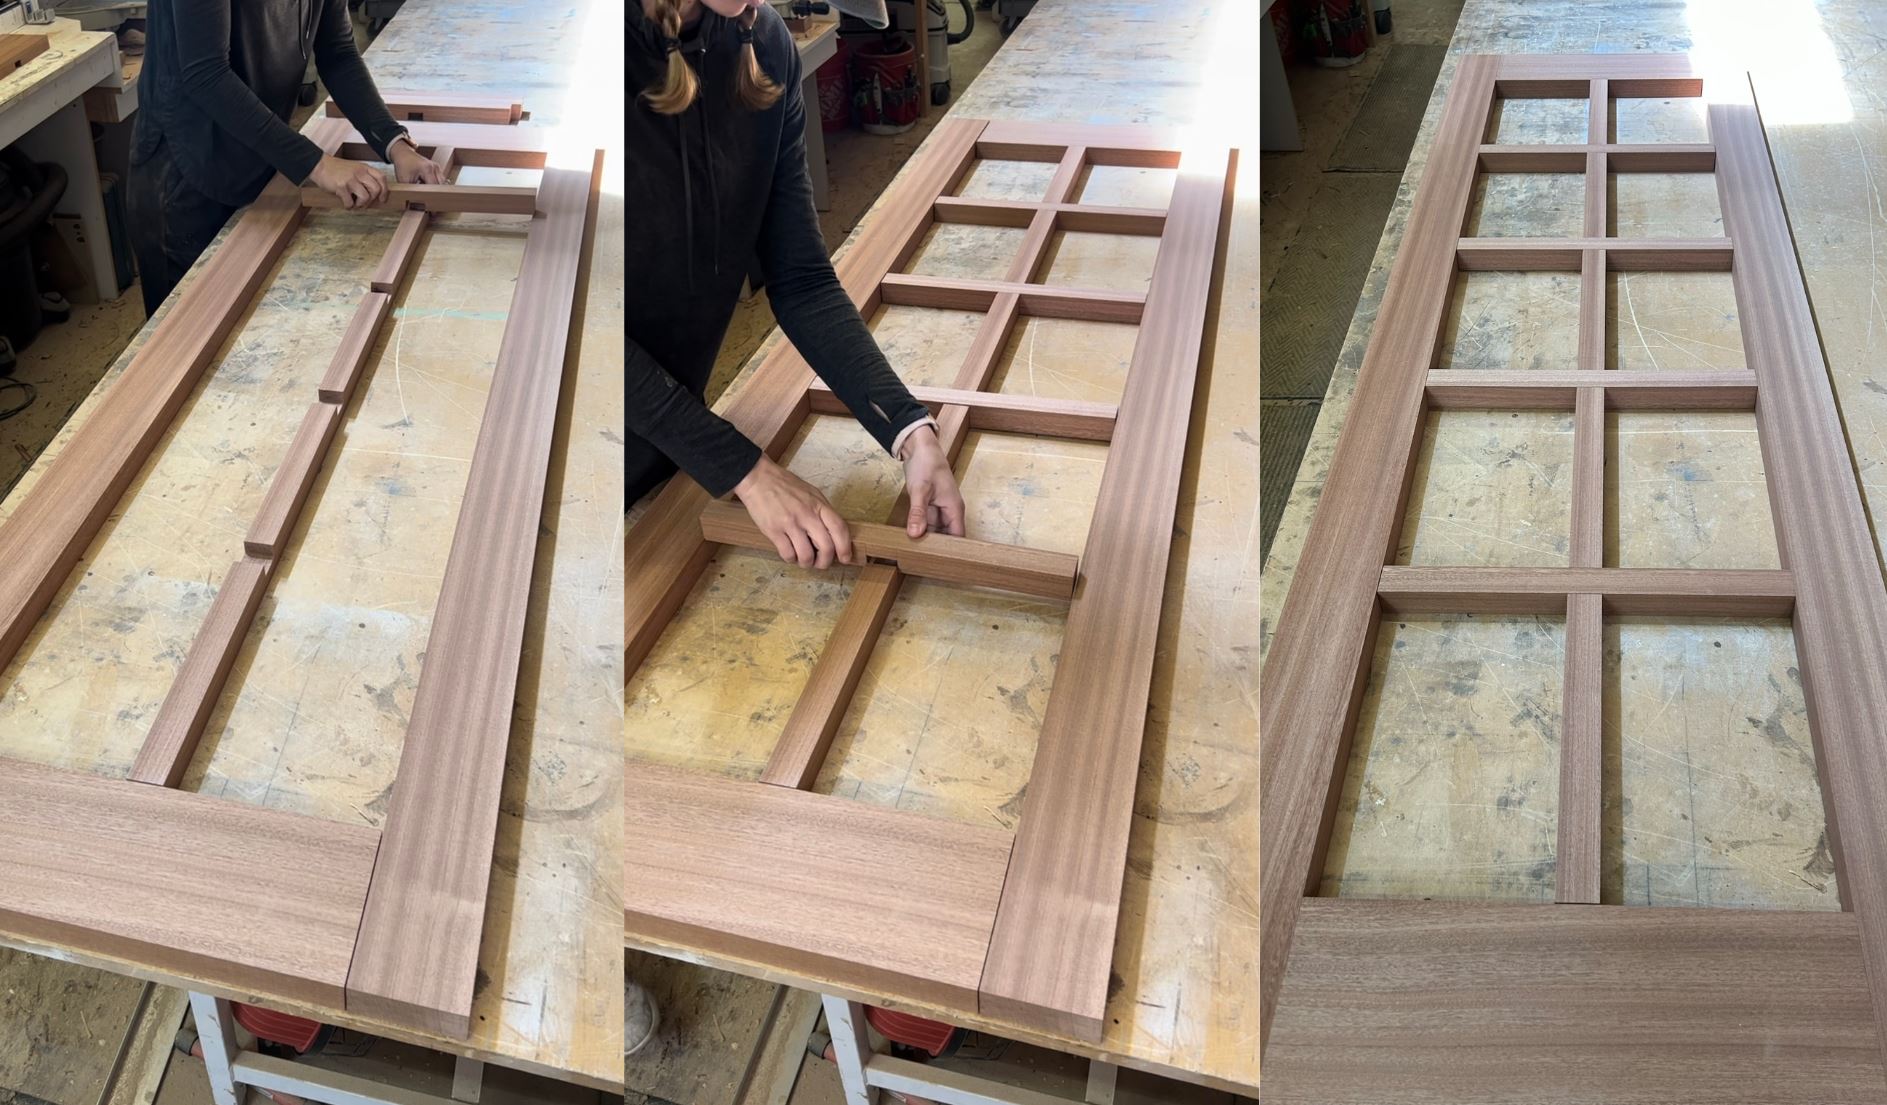 Process for joining the mullion grid squares using traditional half lap joinery techniques